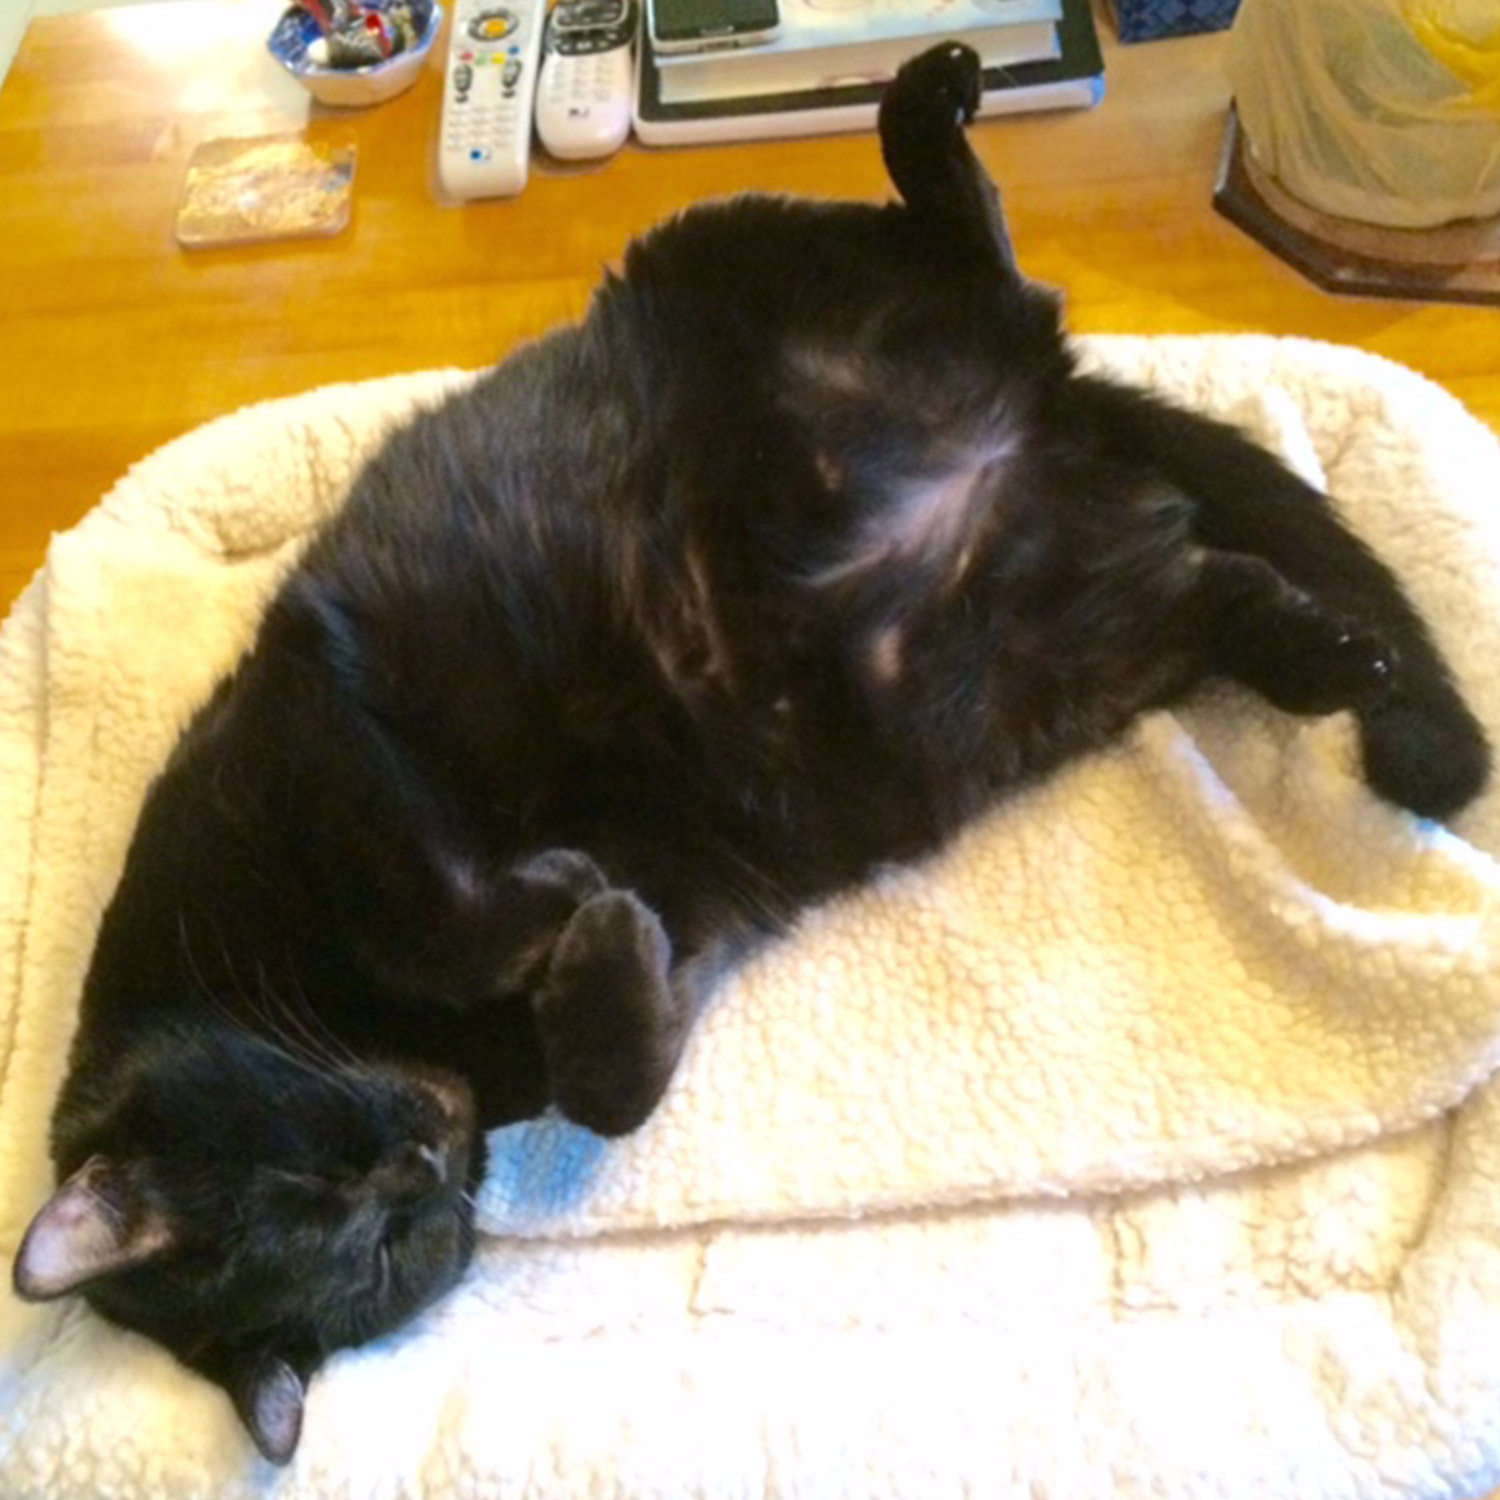 Marjorie m In seabrook tx sent a picture of louie her gorgeous all black bombay cat who is friendly and talkative Here he is enjoying his new bed on the desk in marjories home office